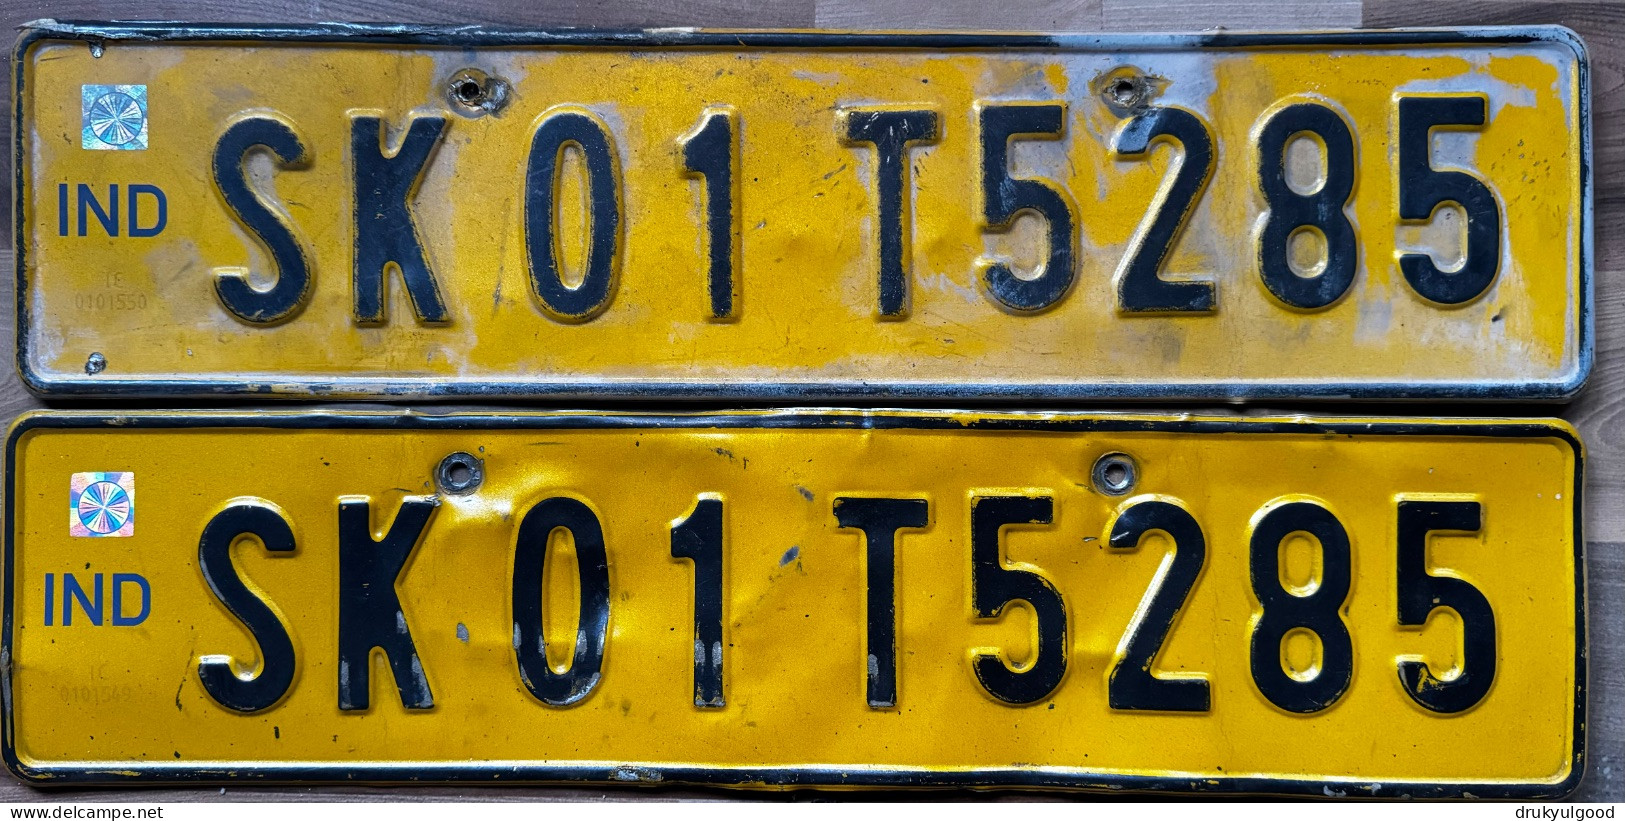 Sikkim India Used Taxi License Plate SK01T5285 - Number Plates